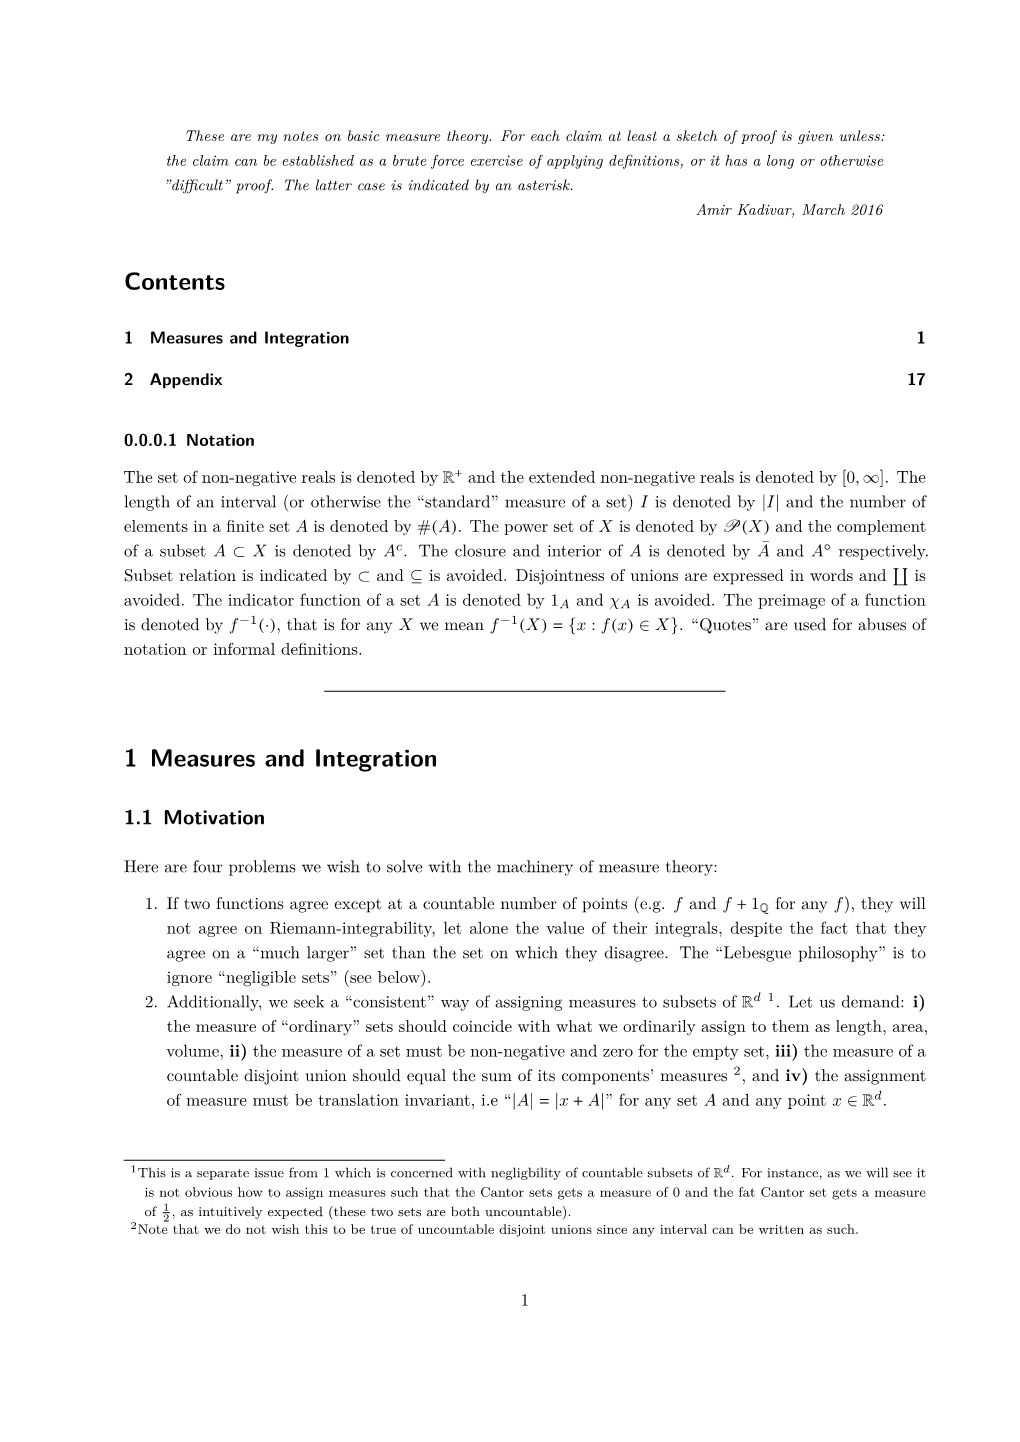 Contents 1 Measures and Integration